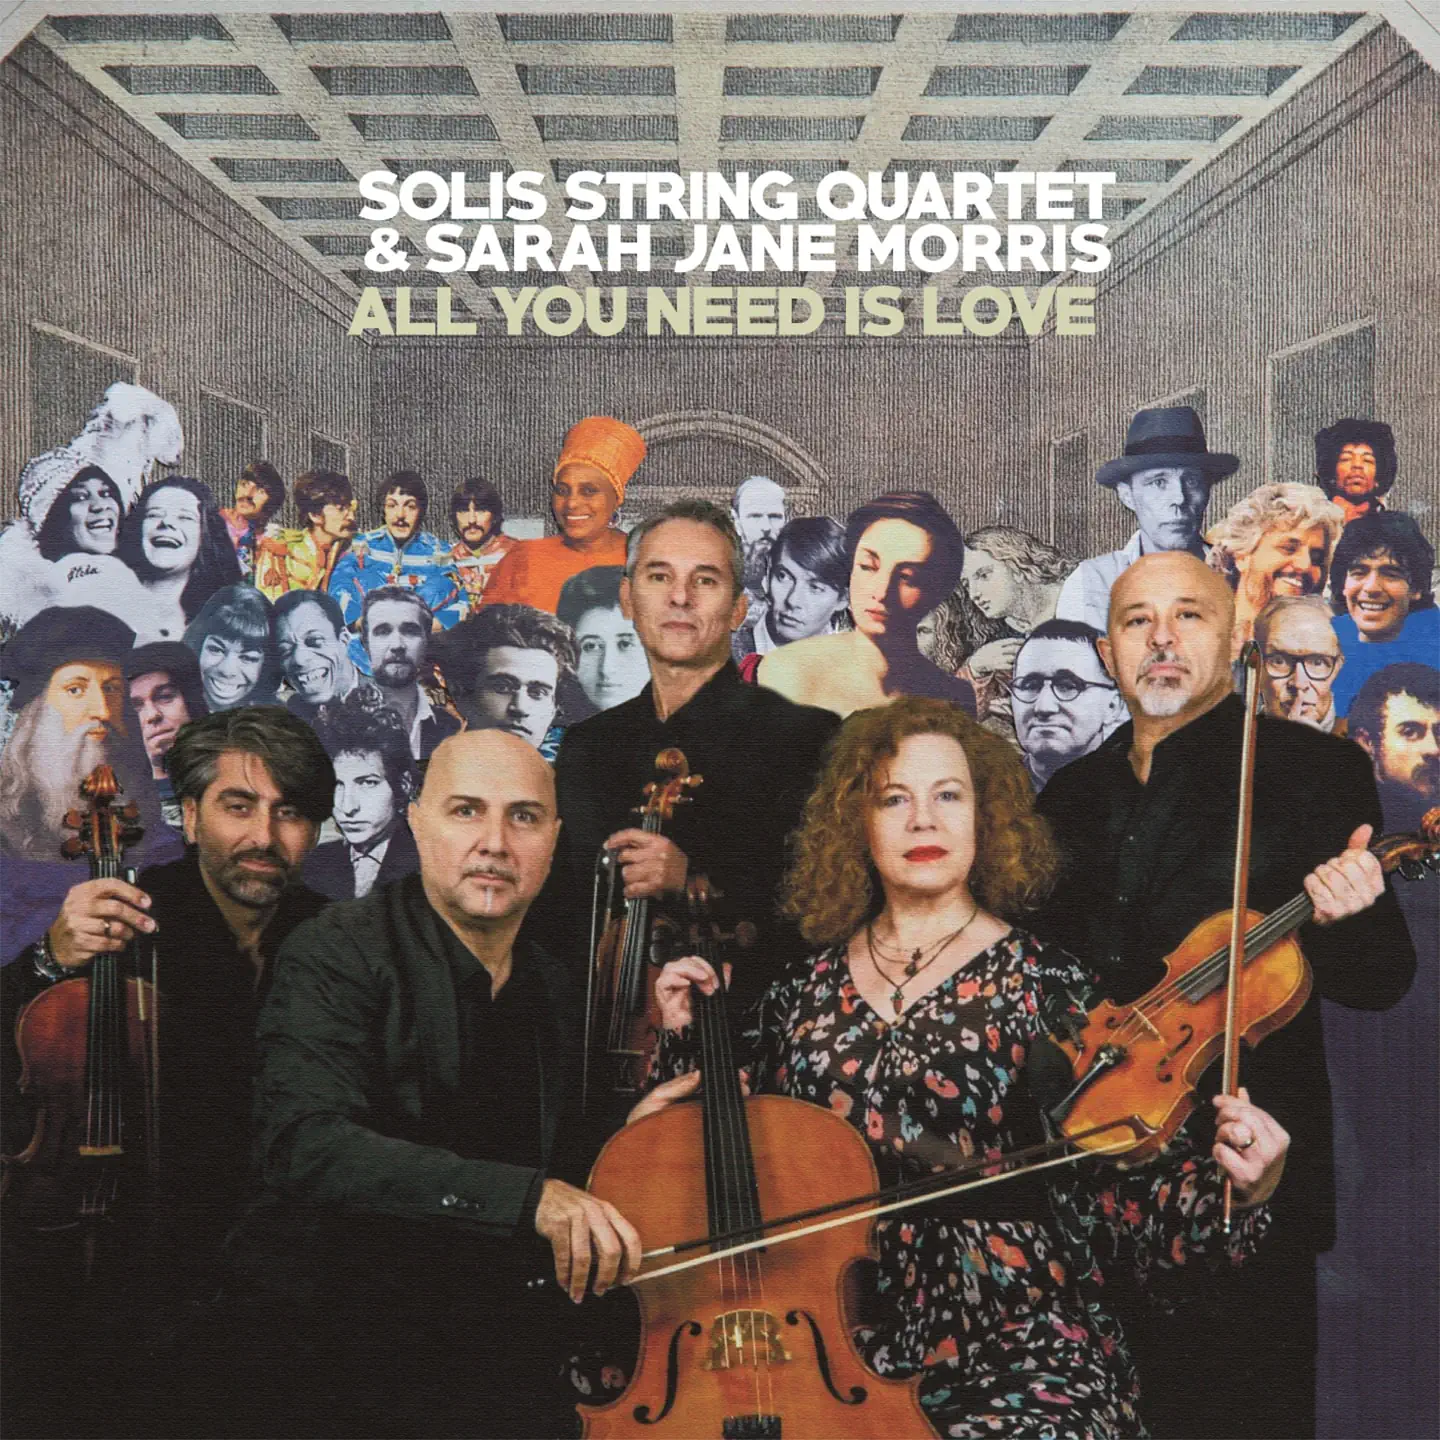 Recensione Solis string quartet - All you need is love